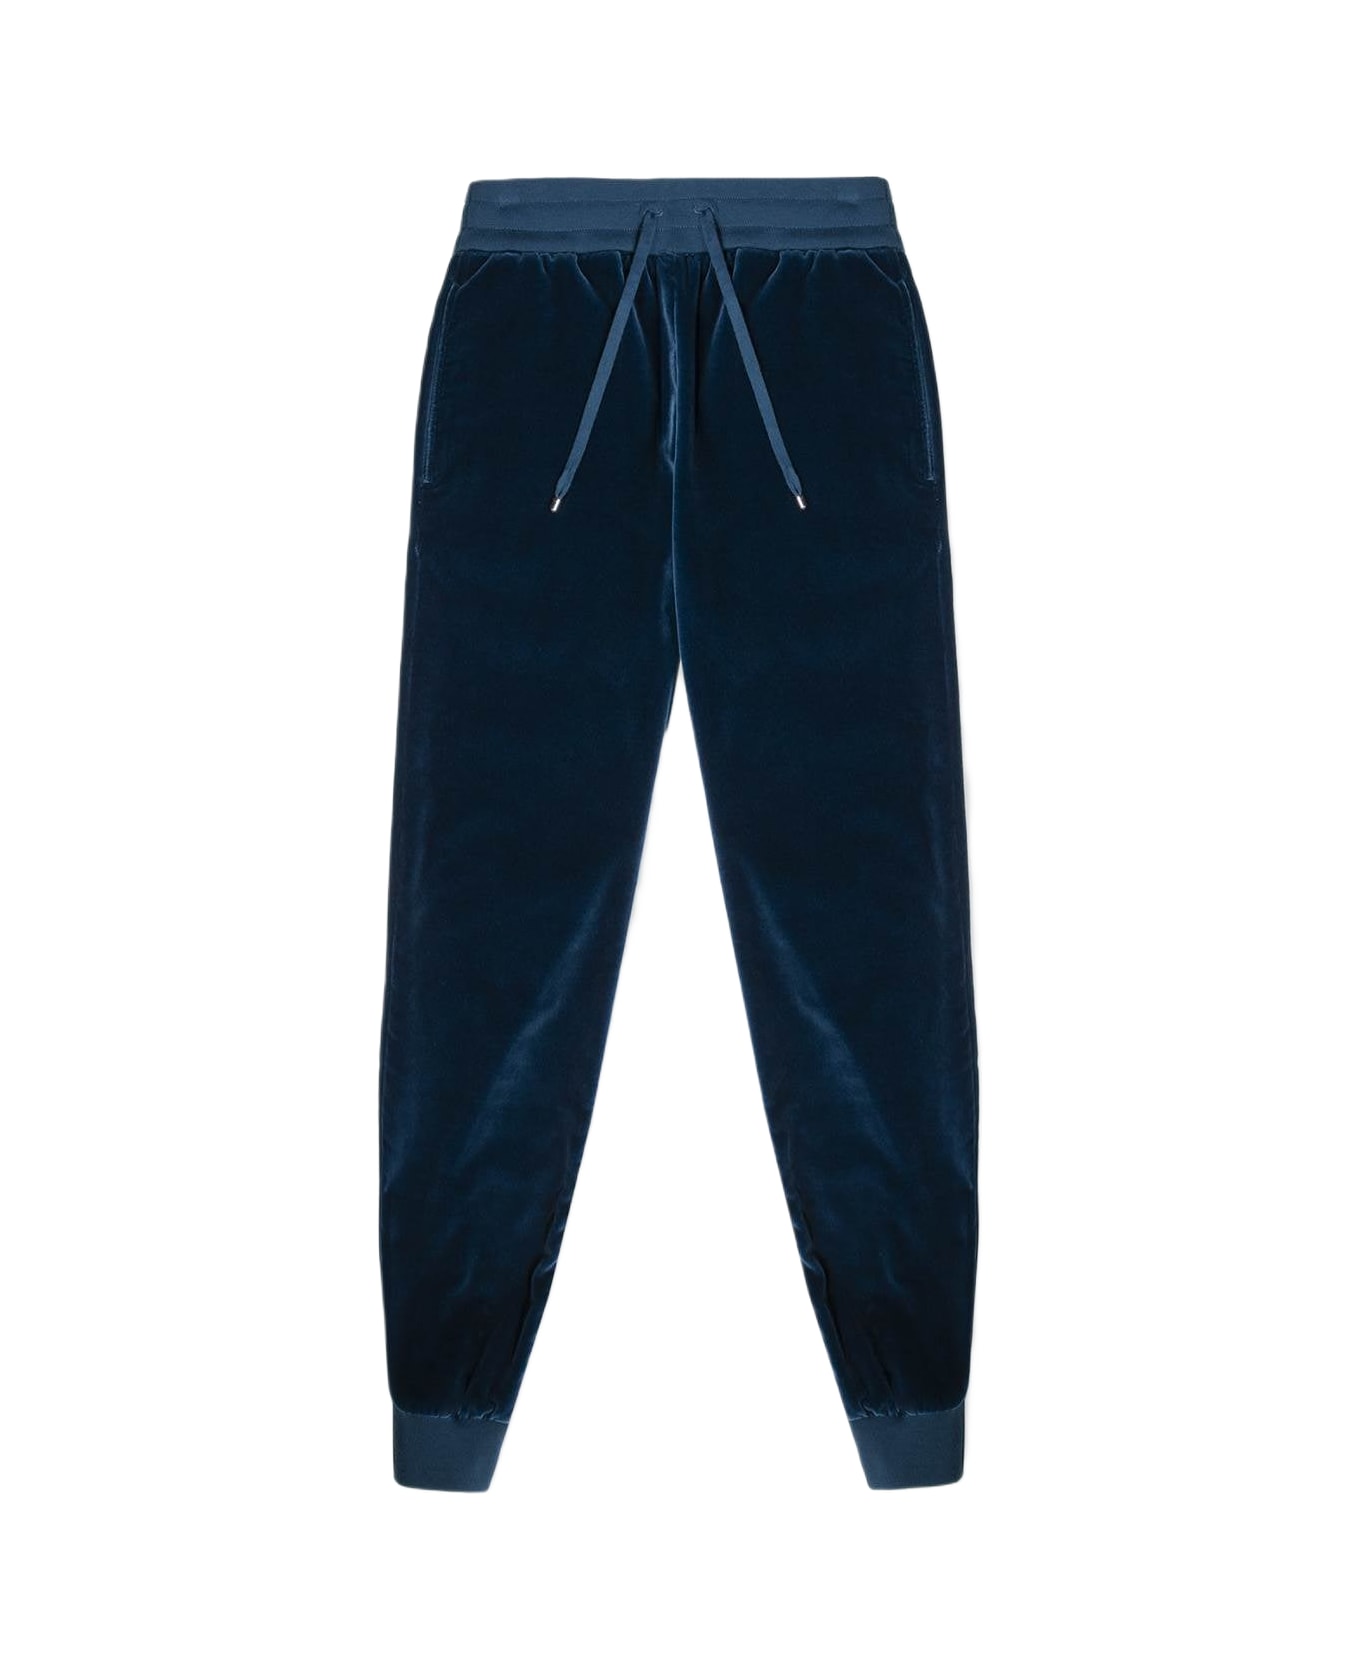 Larusmiani Tracksuit Trousers 'babe' Pants - Teal スウェットパンツ